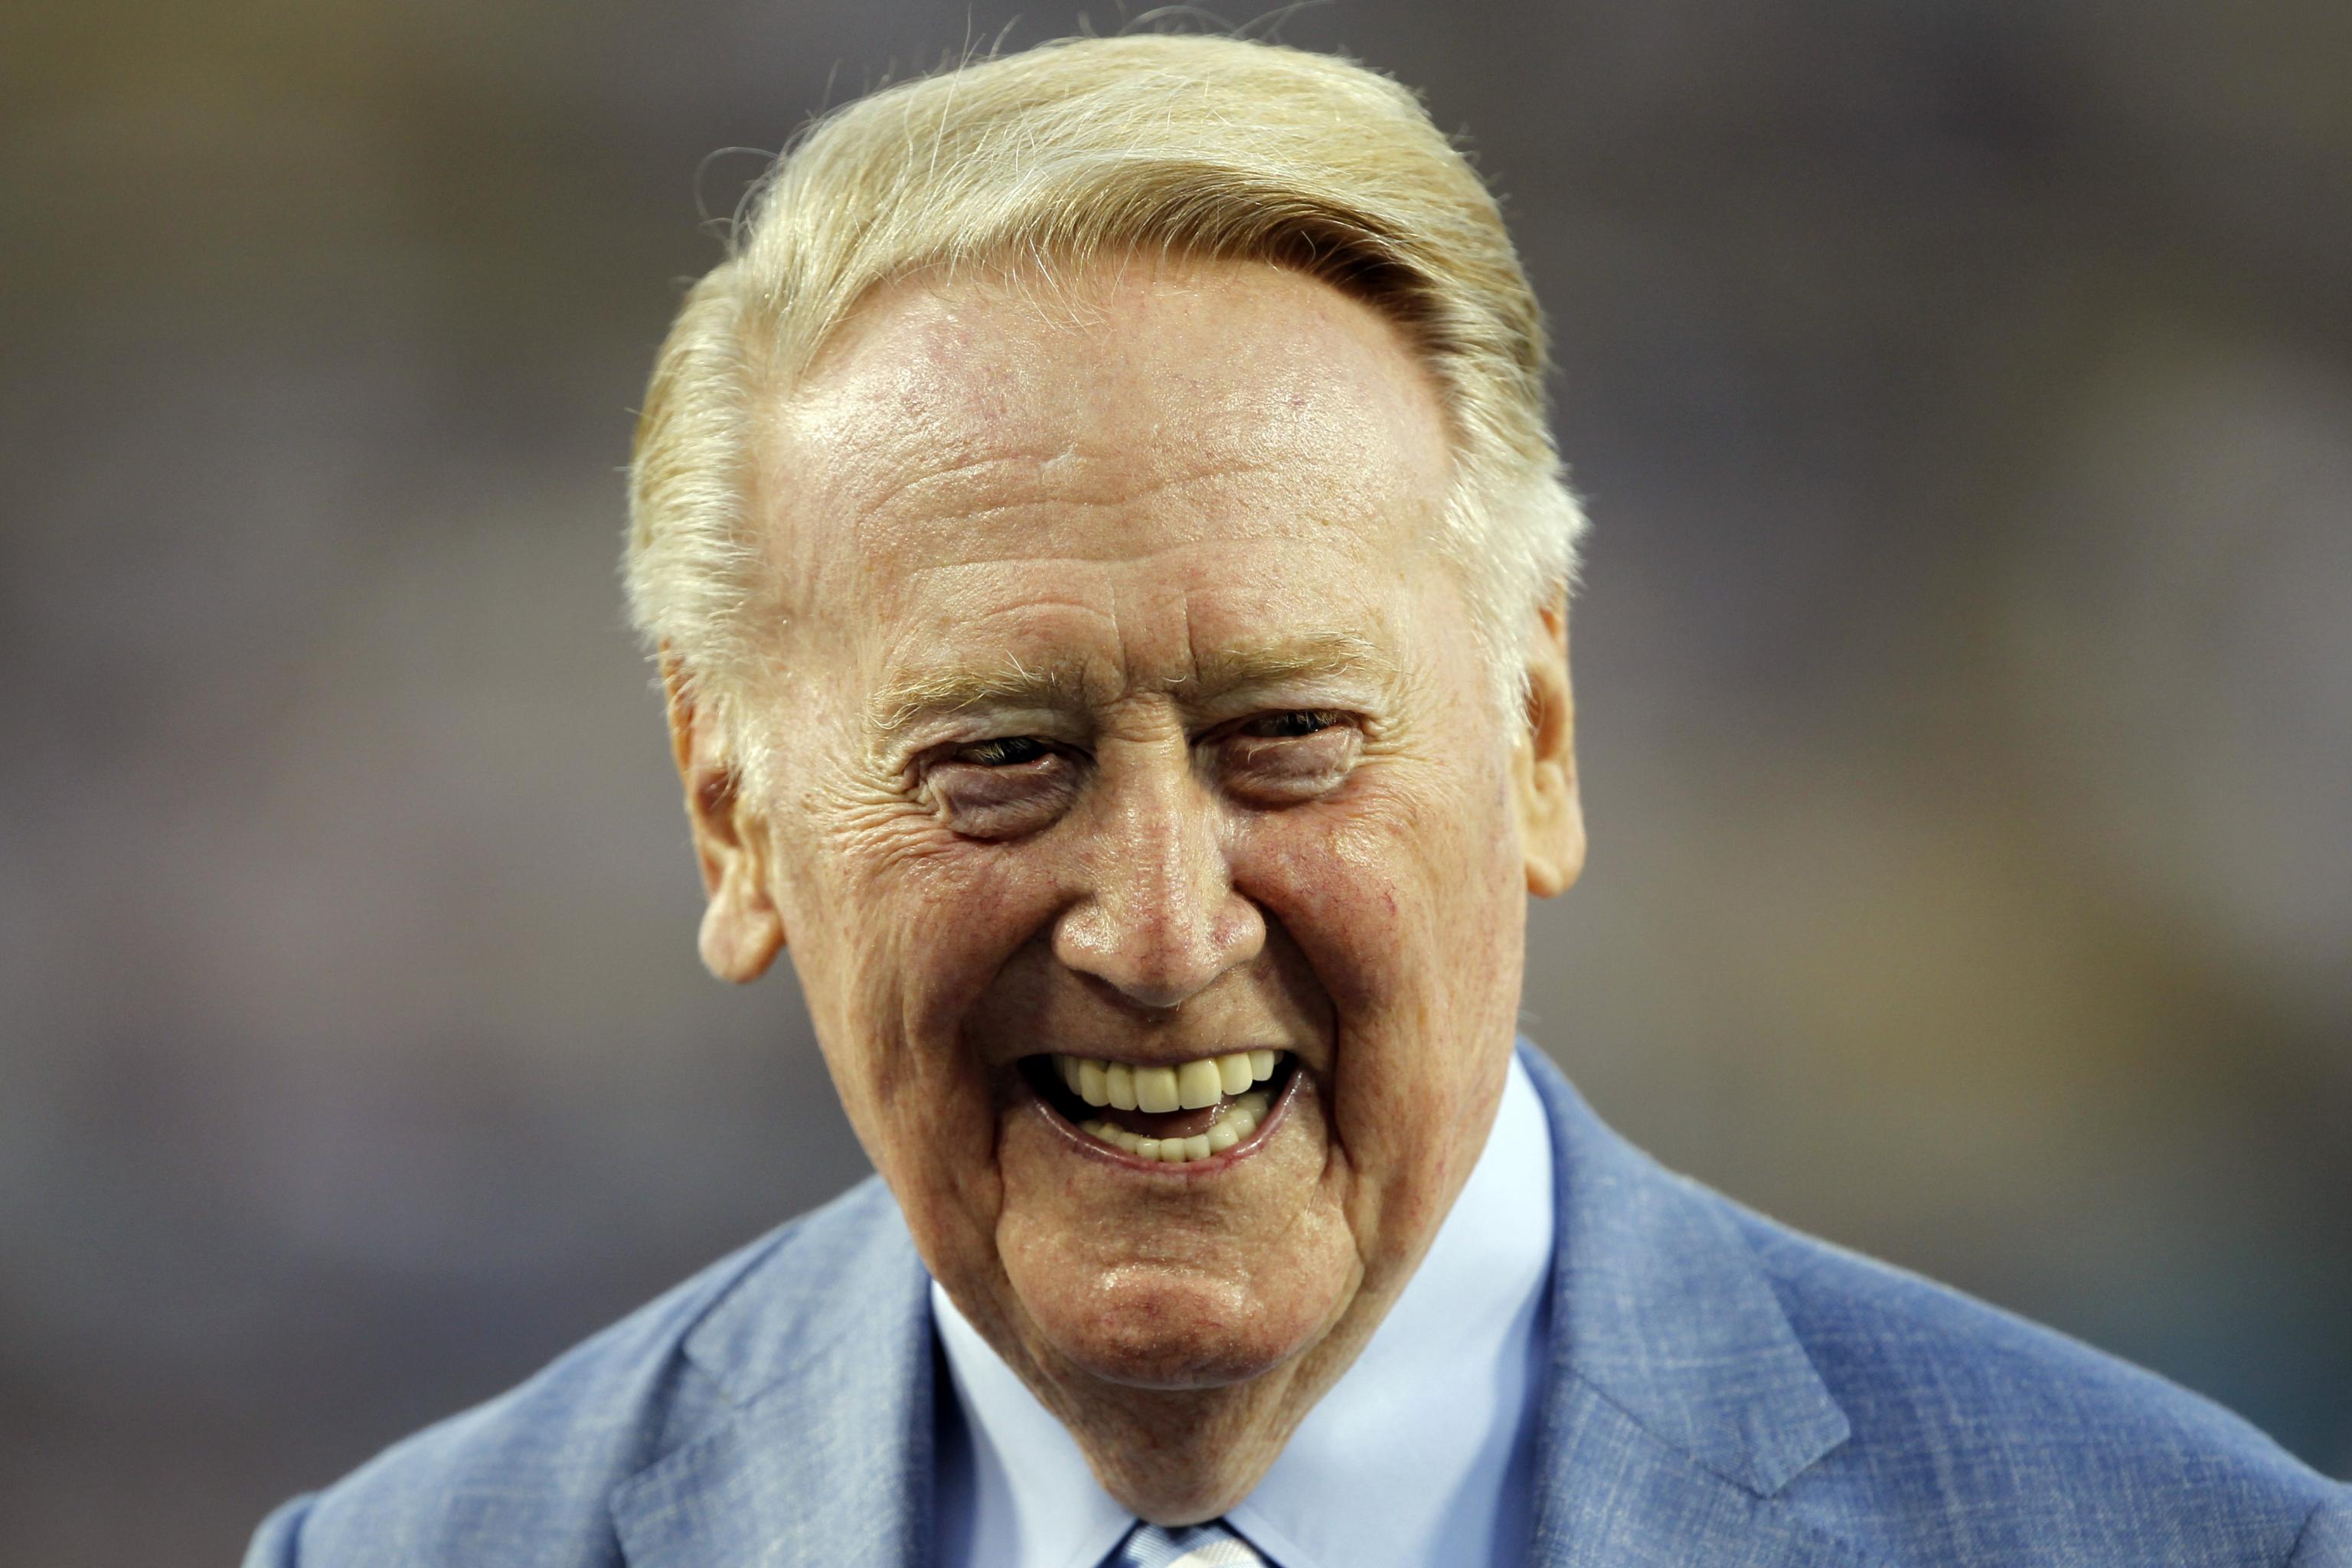 UPDATED: Controversy Erupts Over Street Name Change to Vin Scully